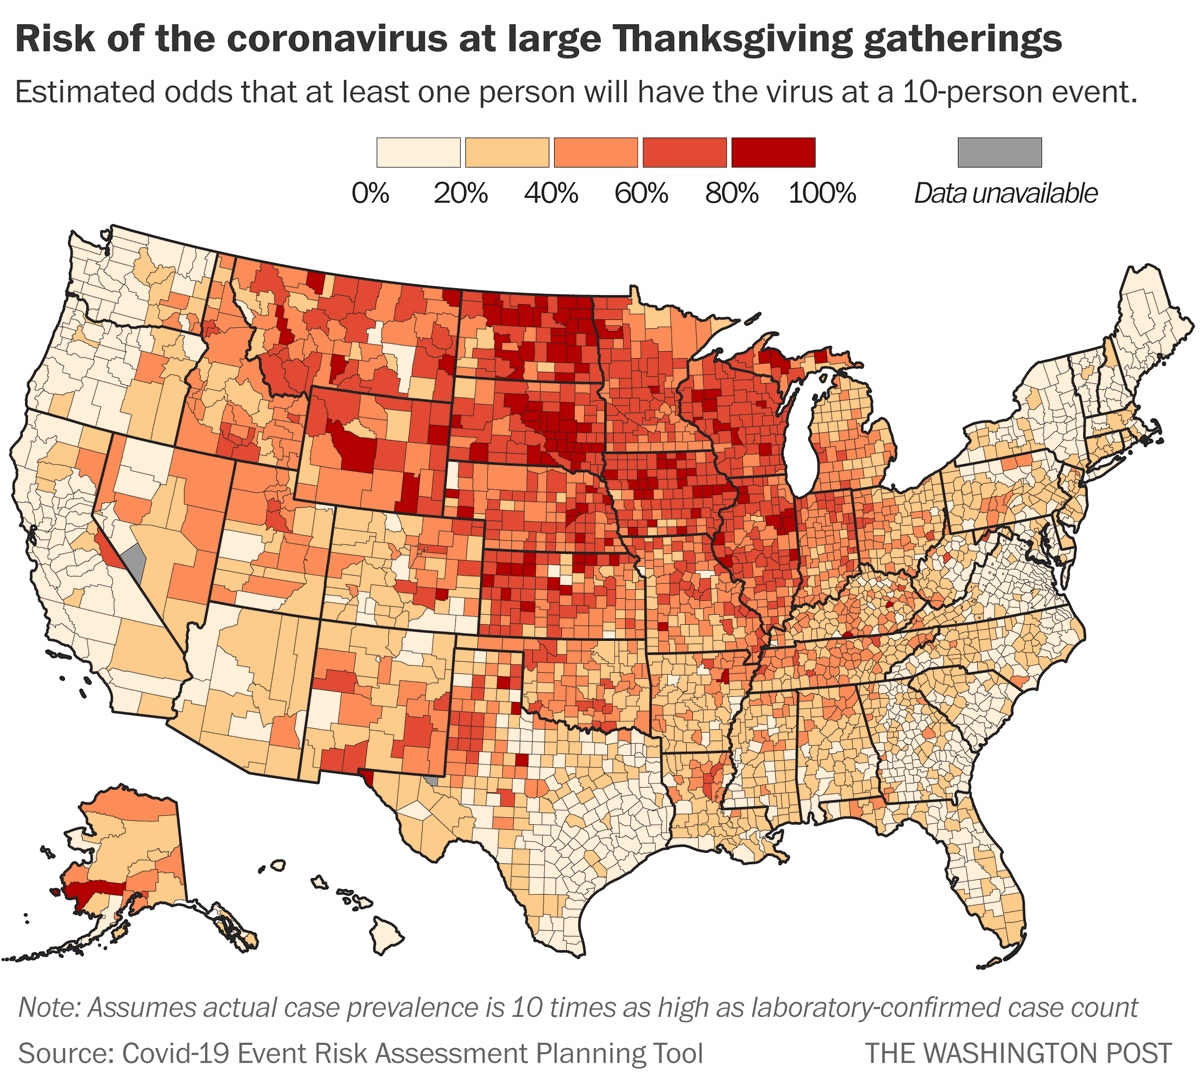 A recent survey found that 40% of Americans plan to attend a Thanksgiving gathering with 10 or more people. Here are the odds of encountering a Covid-positive person at one of those gatherings.  https://www.washingtonpost.com/business/2020/11/18/map-covid-risk-thanksgiving/